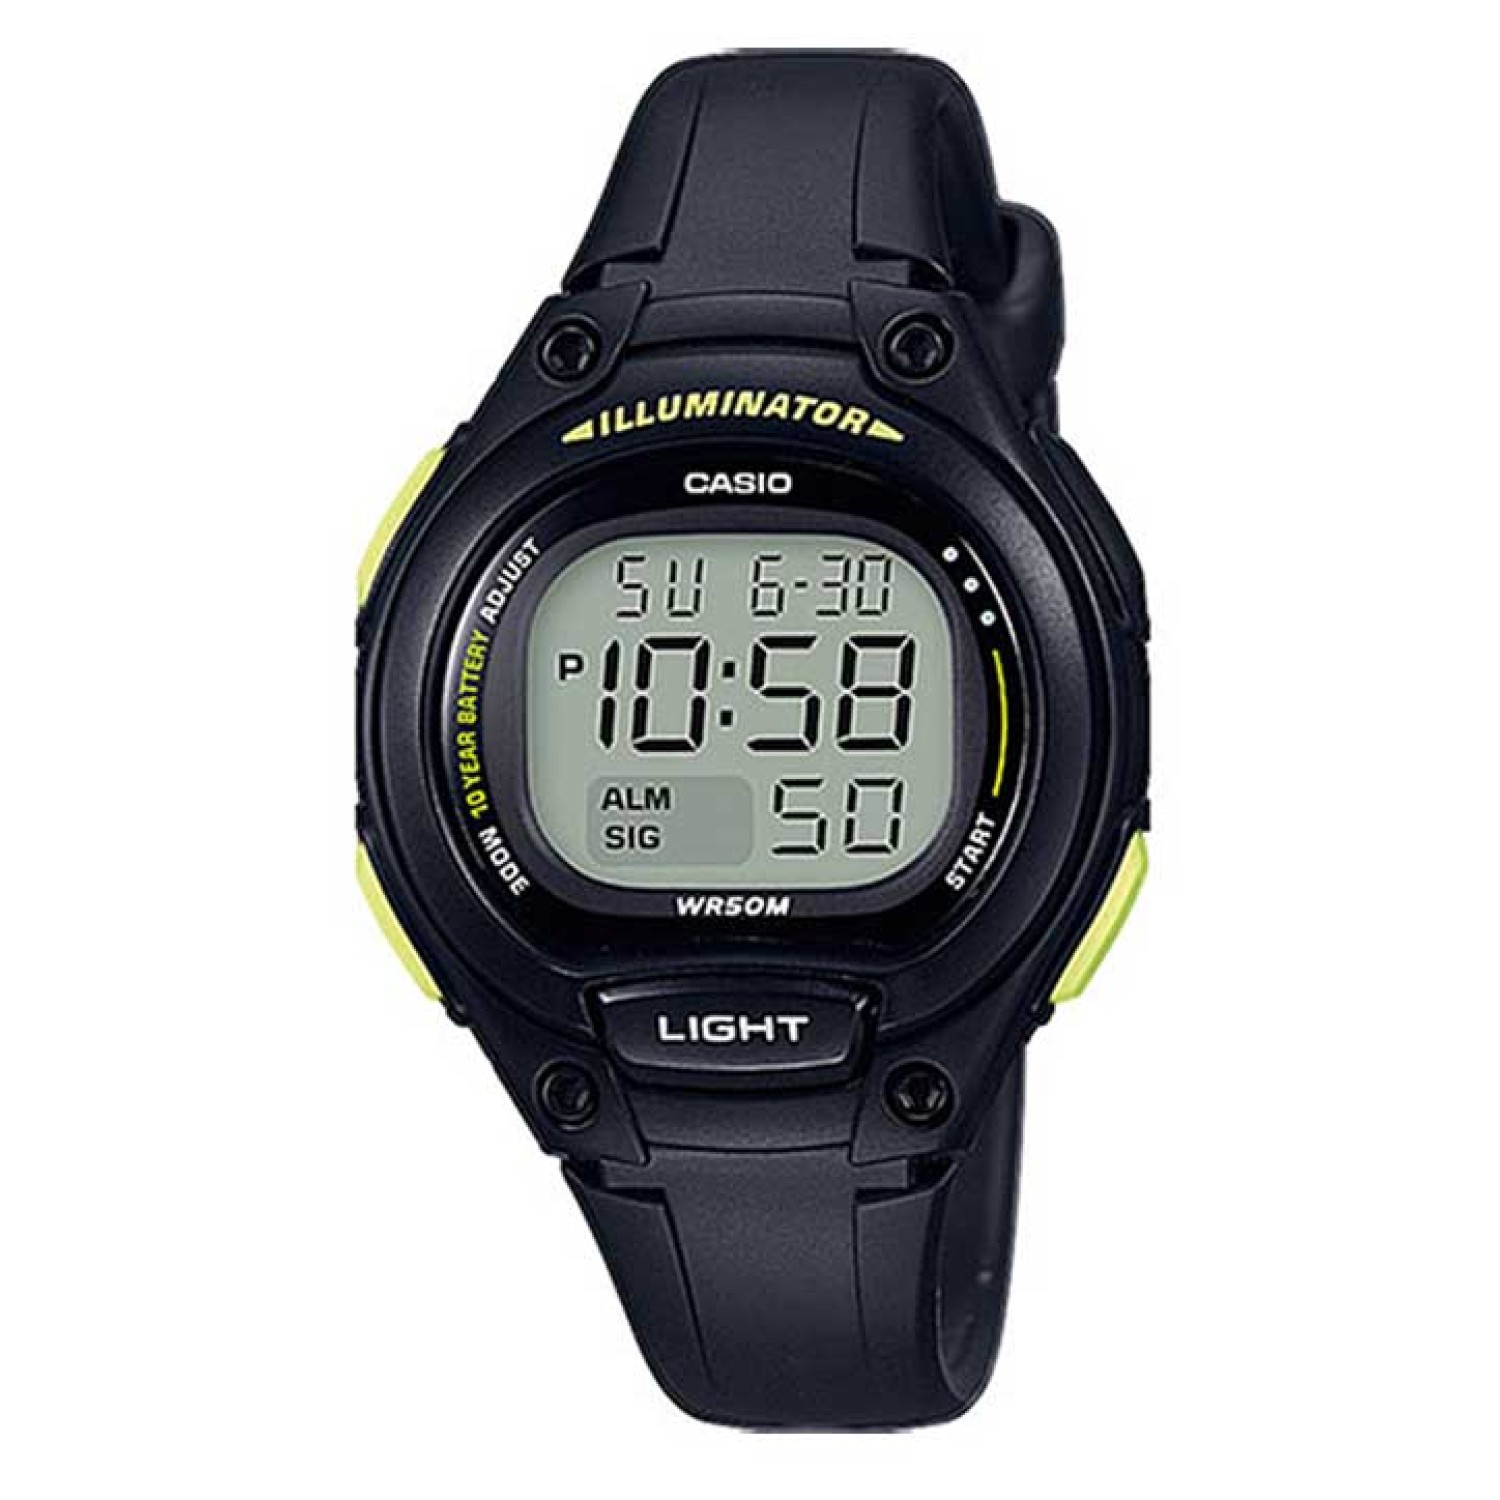 LW203-1B Casio 50 Metres 10 Year Battery Watch. Casio’s Illuminator digital watch is a sleek and sporty timepiece featuring a black plastic resin band, a metallic resin case and a large digital time display with stopwatch and day and date functions. Water